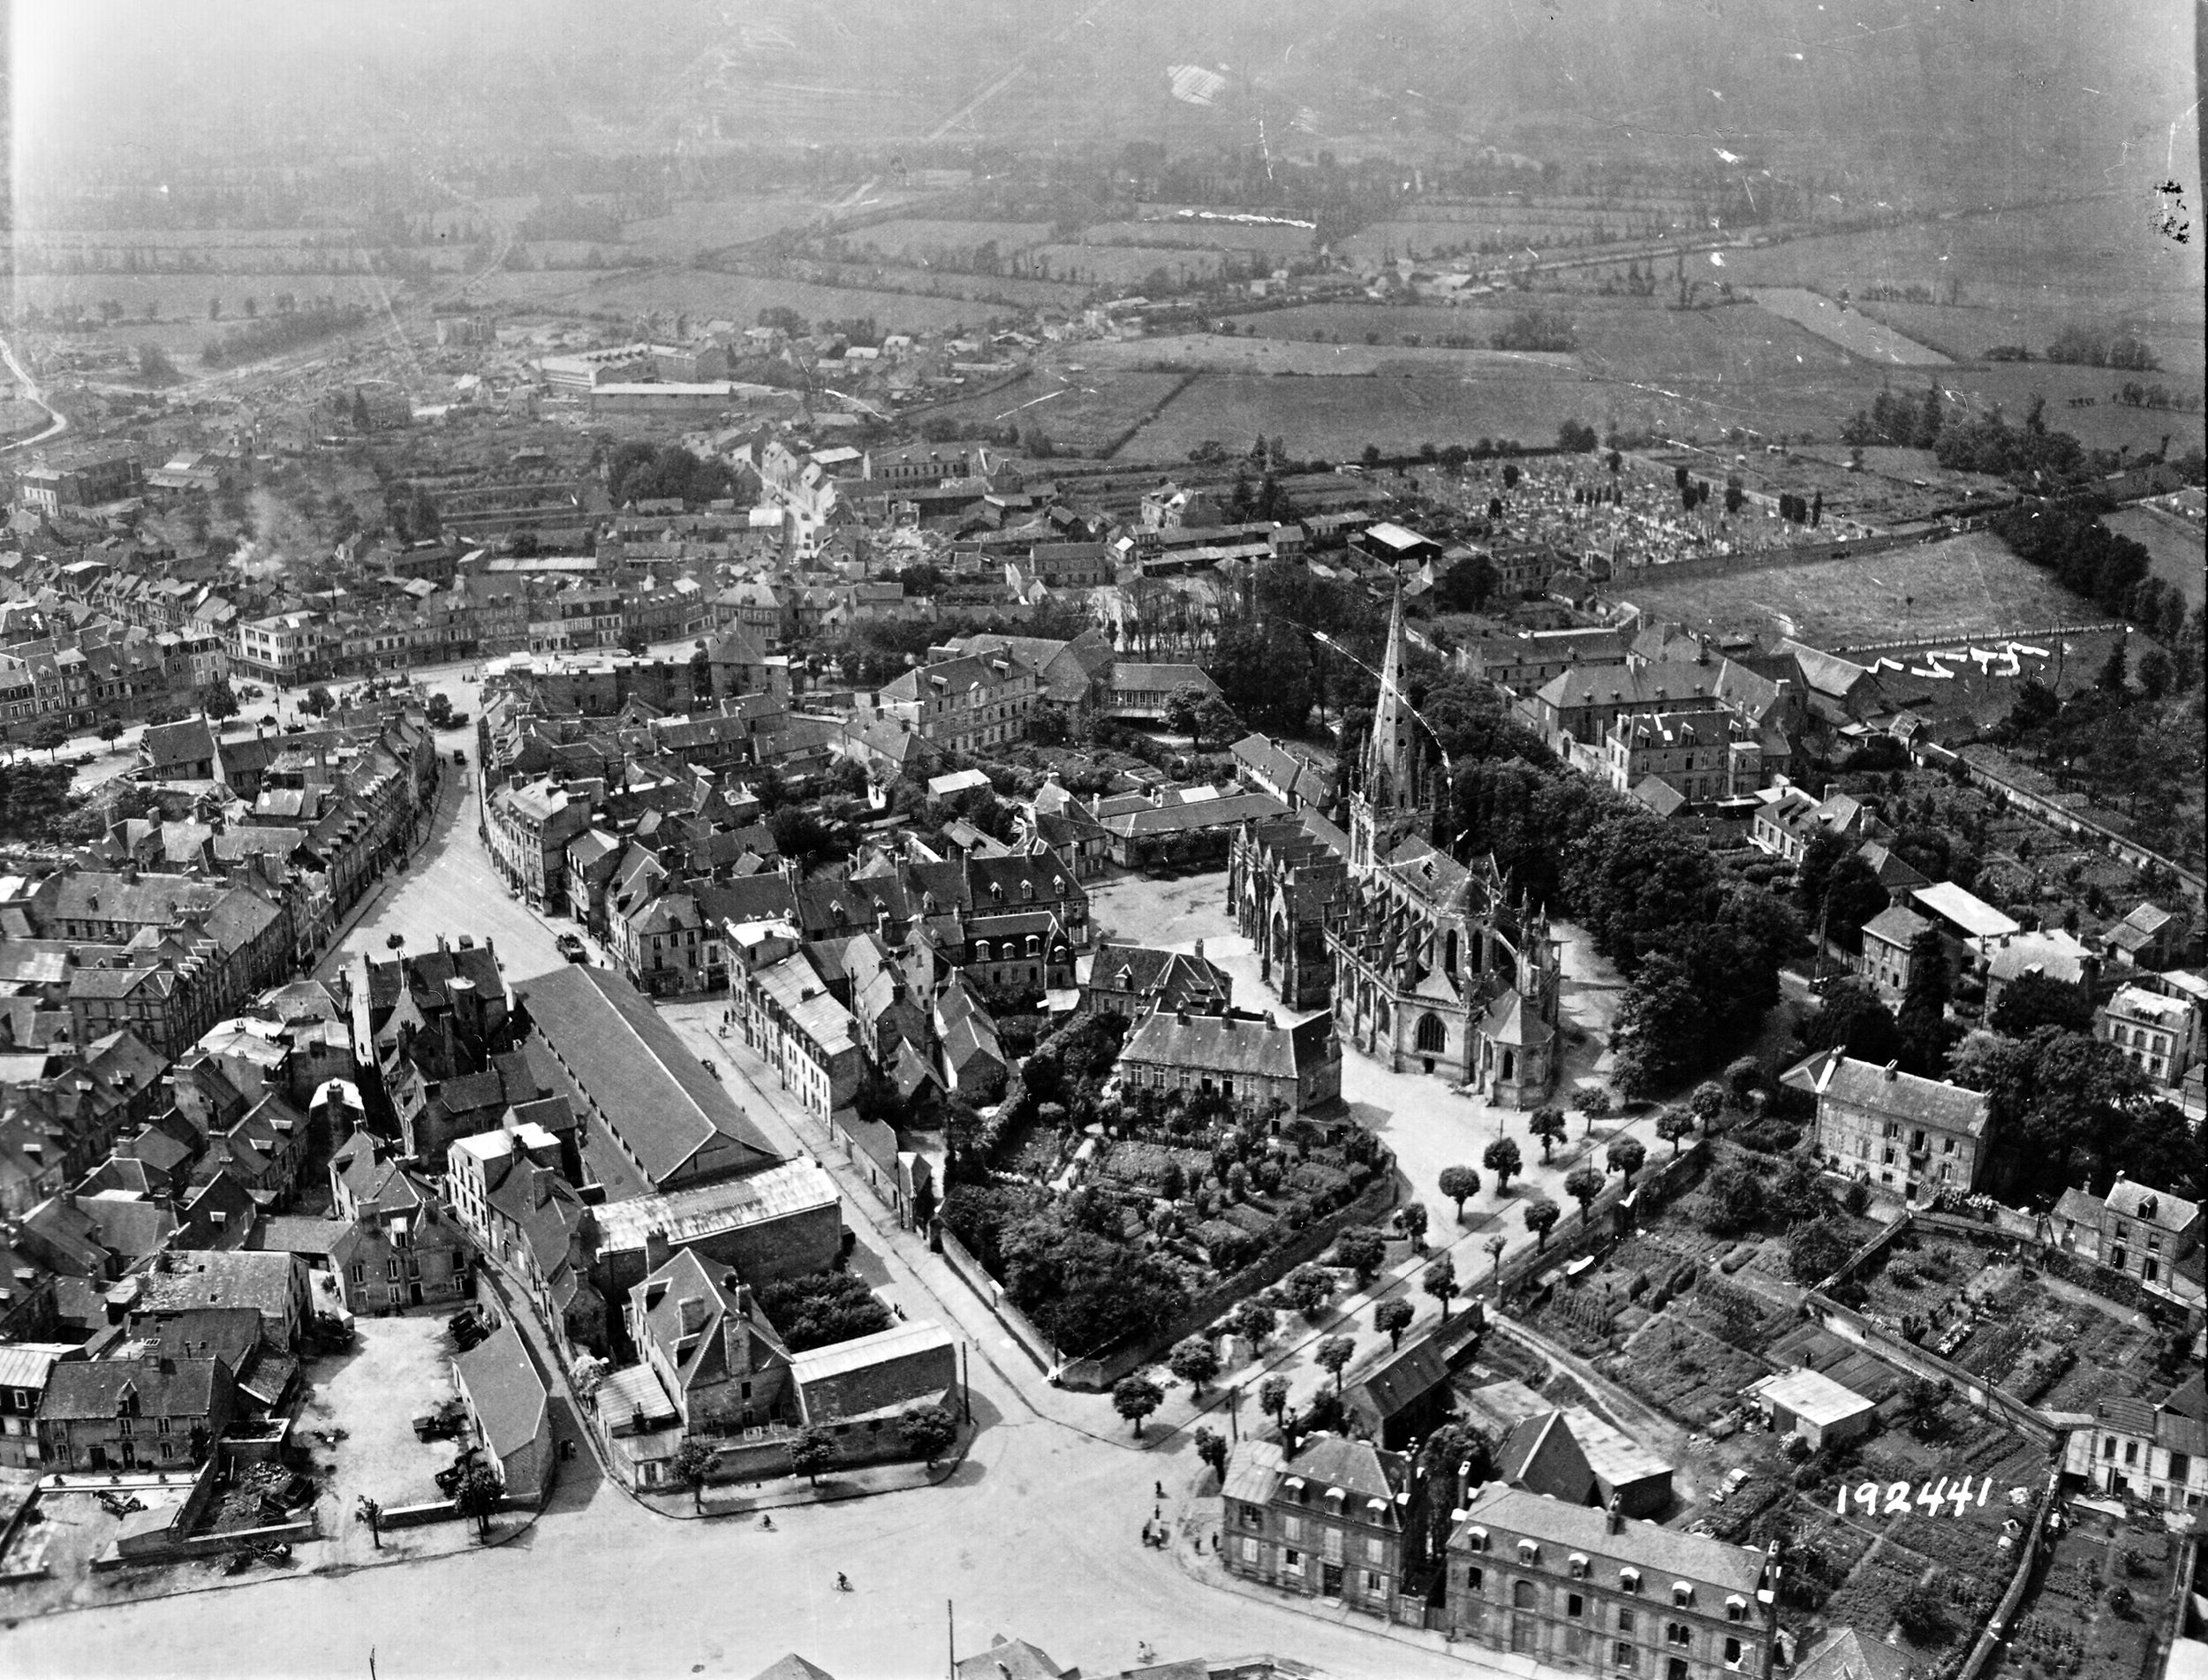 Aerial reconnaissance photo of Carentan taken before the heavy fighting reduced much of the town to rubble.